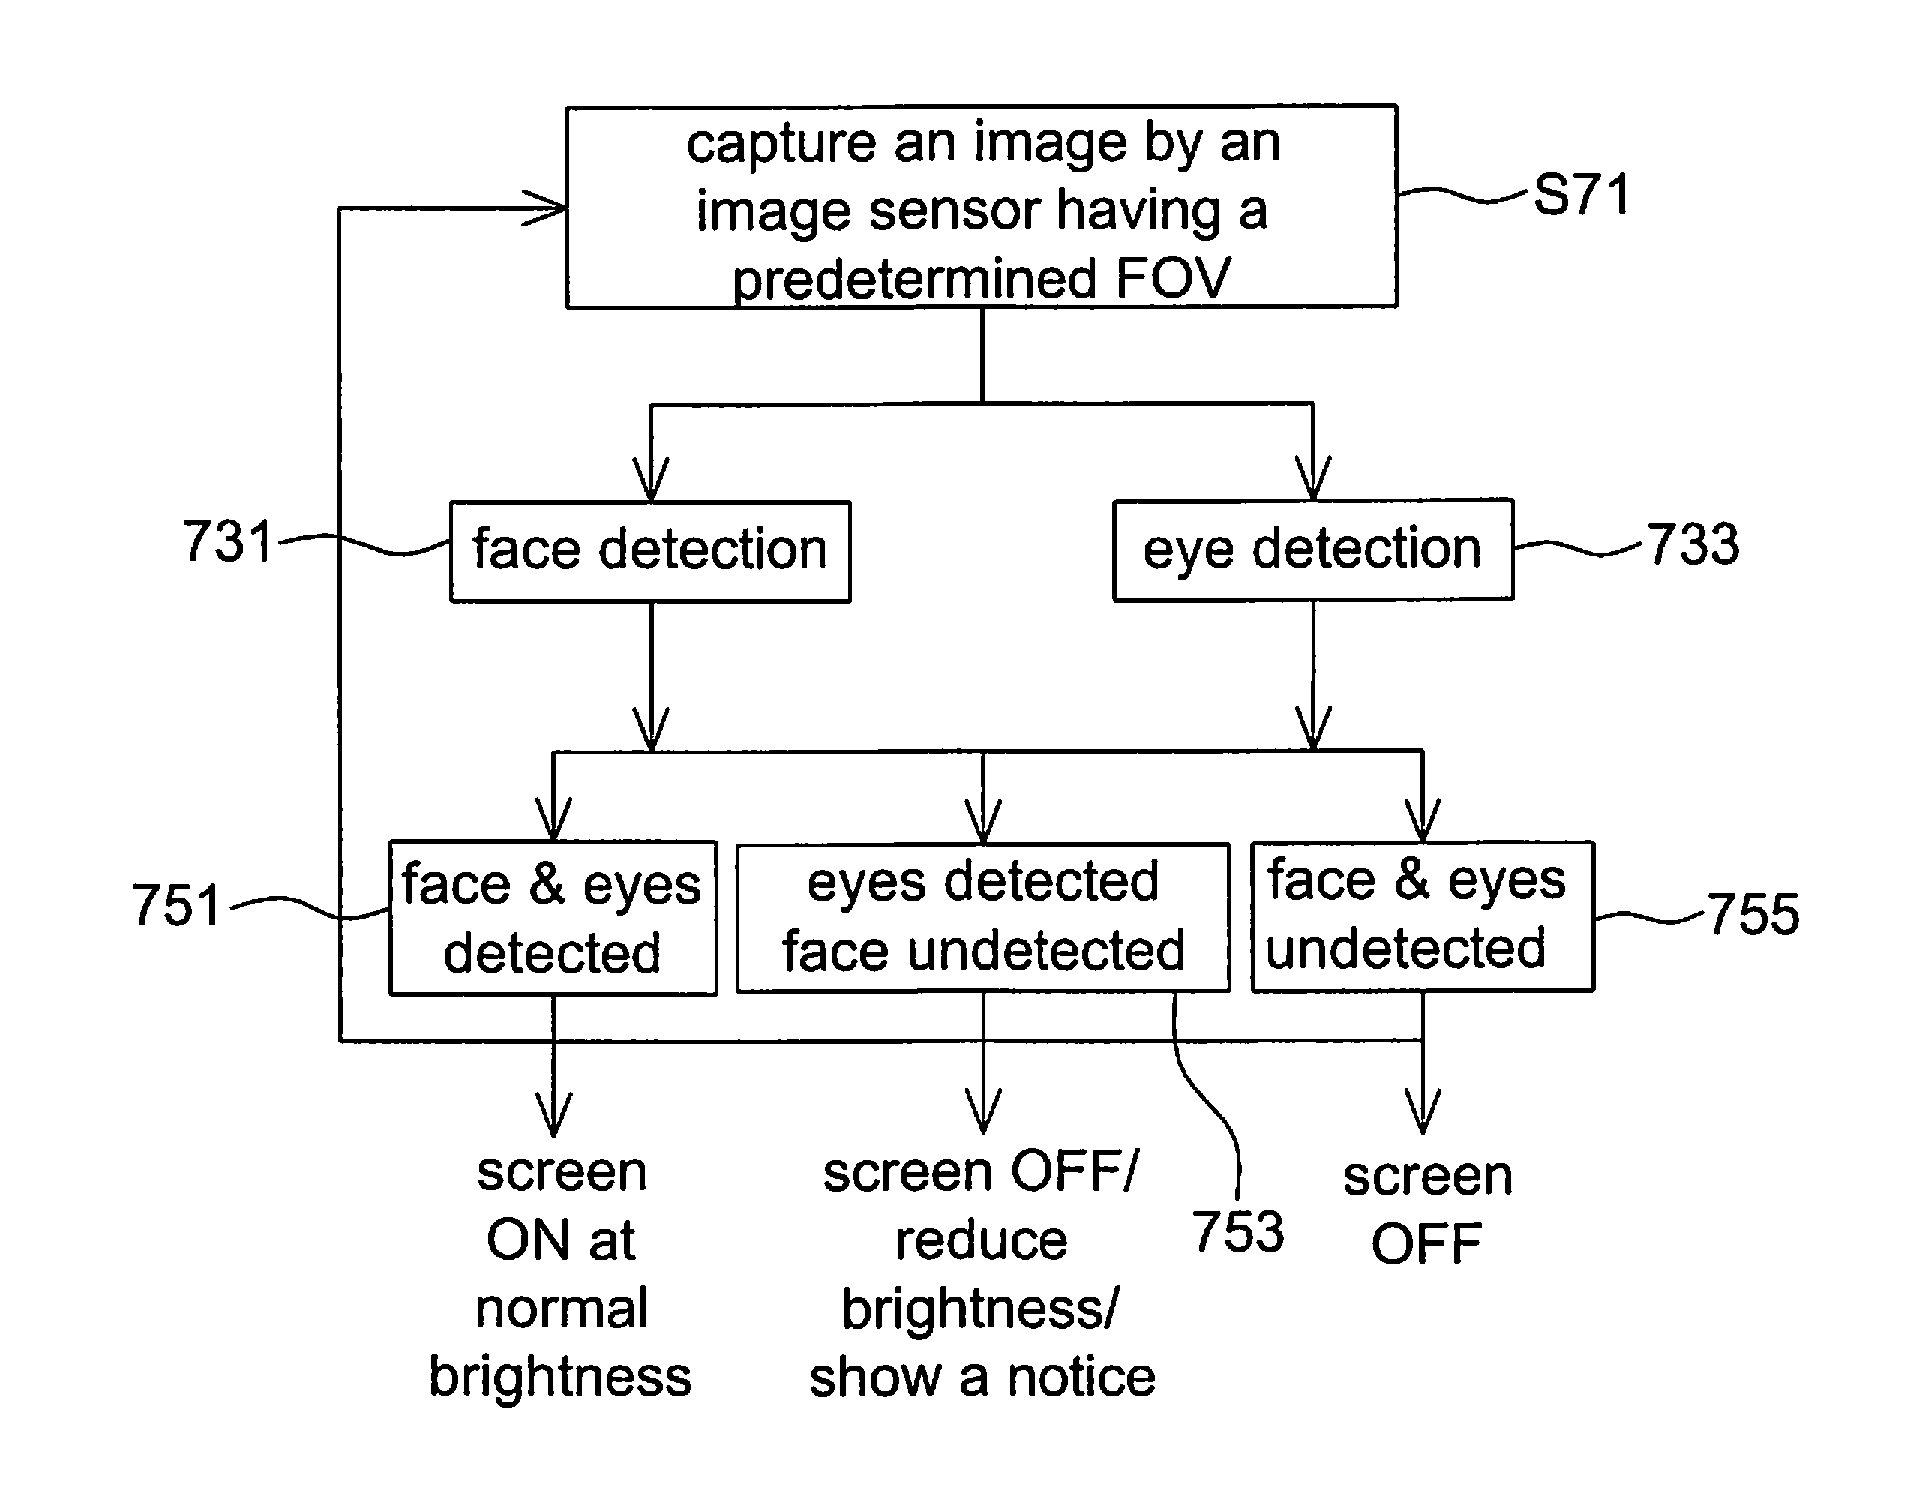 Image system with eye protection